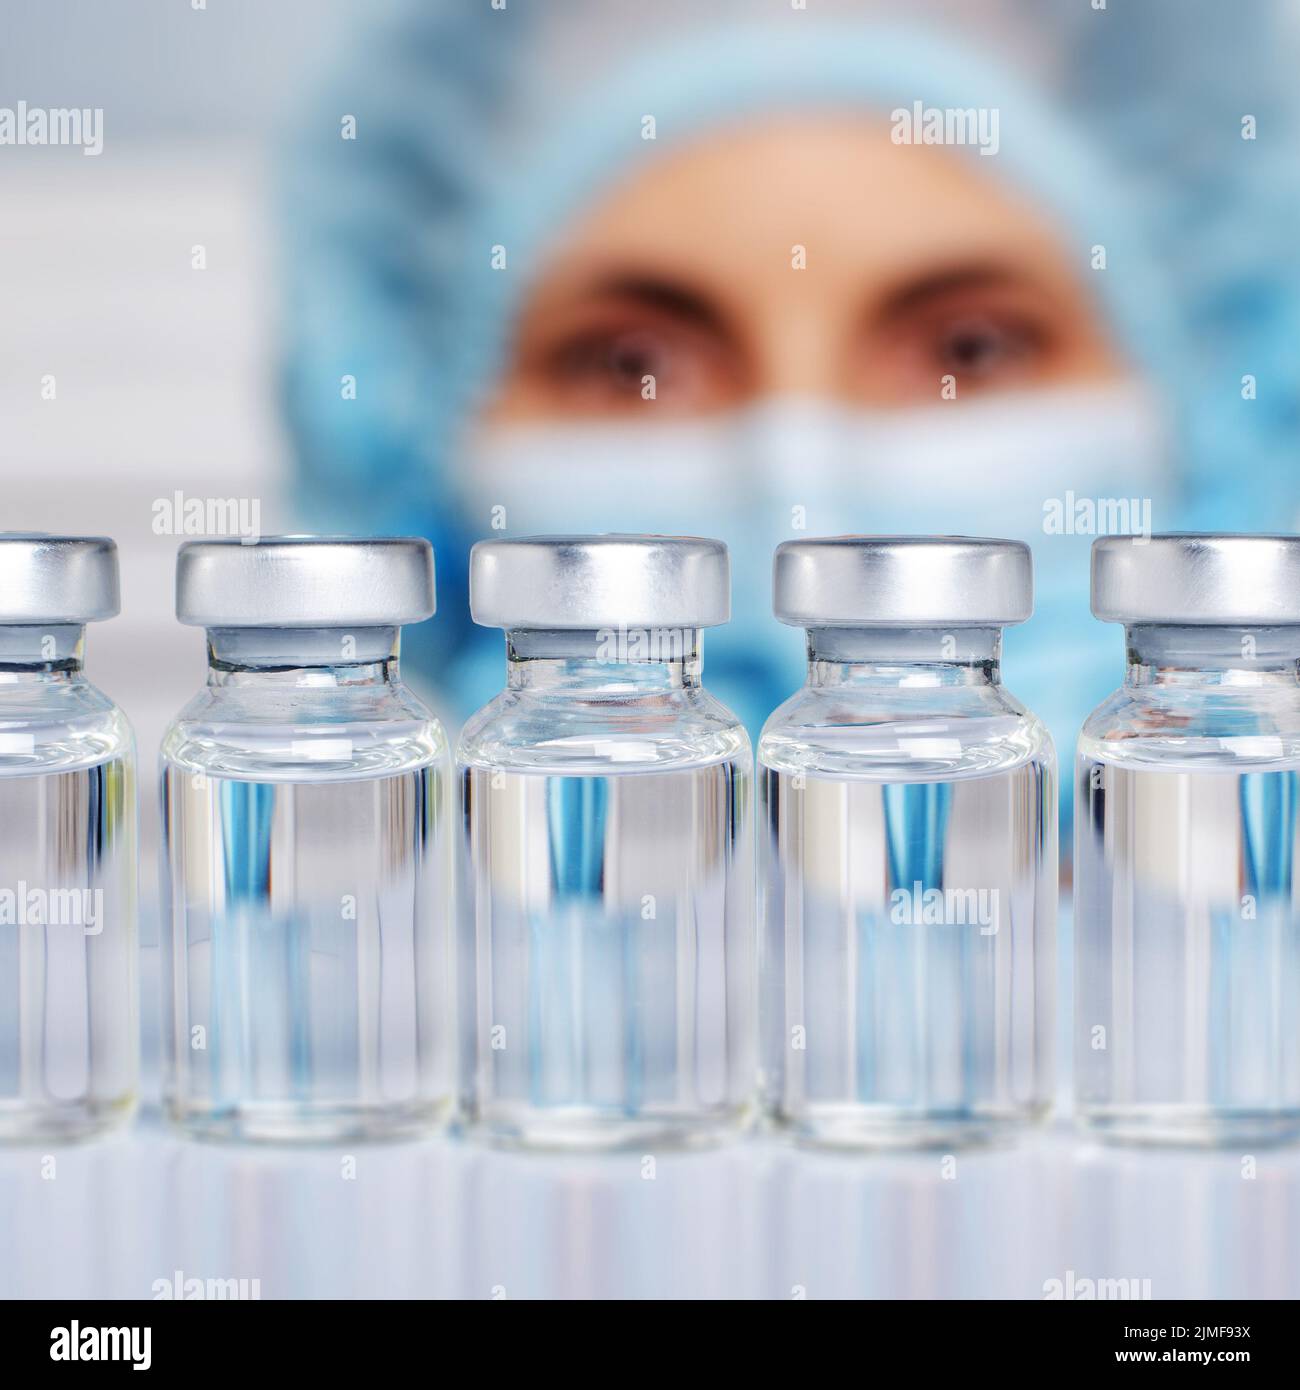 Female nurse in safety mask and cap looks at vials with liquid medicine on refrigerator shelf Stock Photo